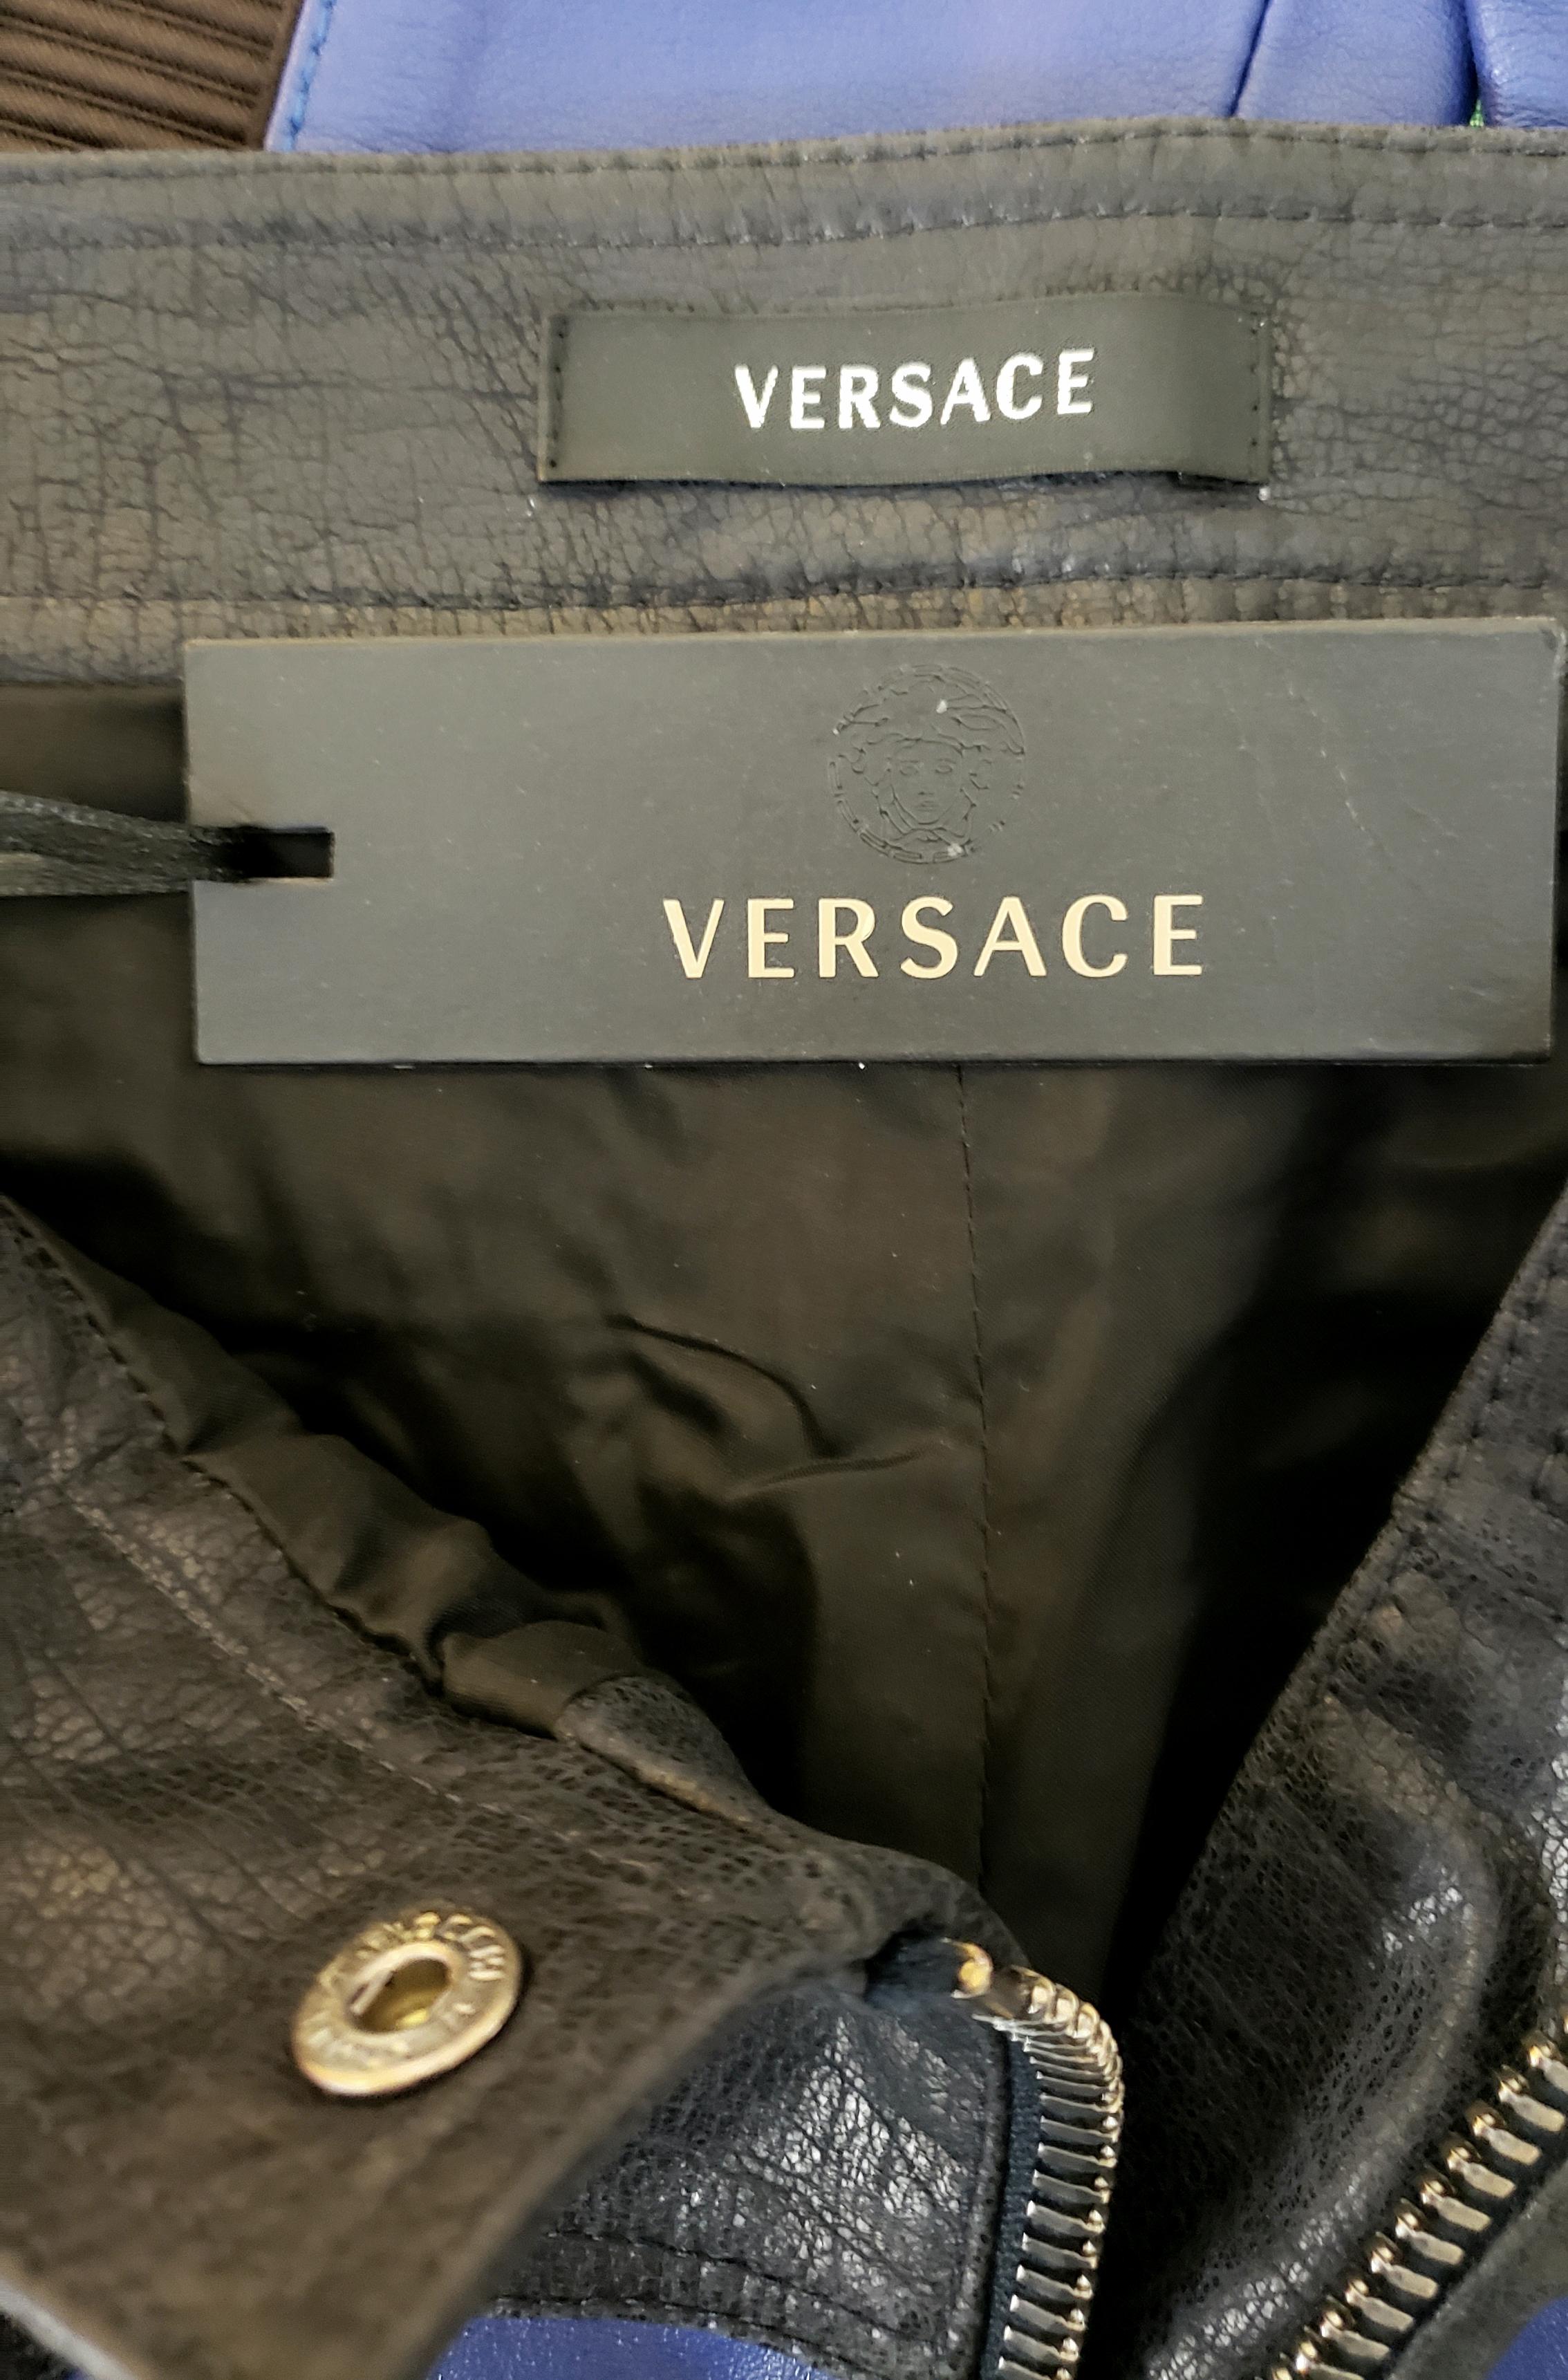 F/W 2010 L #13 VERSACE BLUE and NAVY BLUE MOTORCYCLE LEATHER PANTS size 38 - 2 For Sale 4